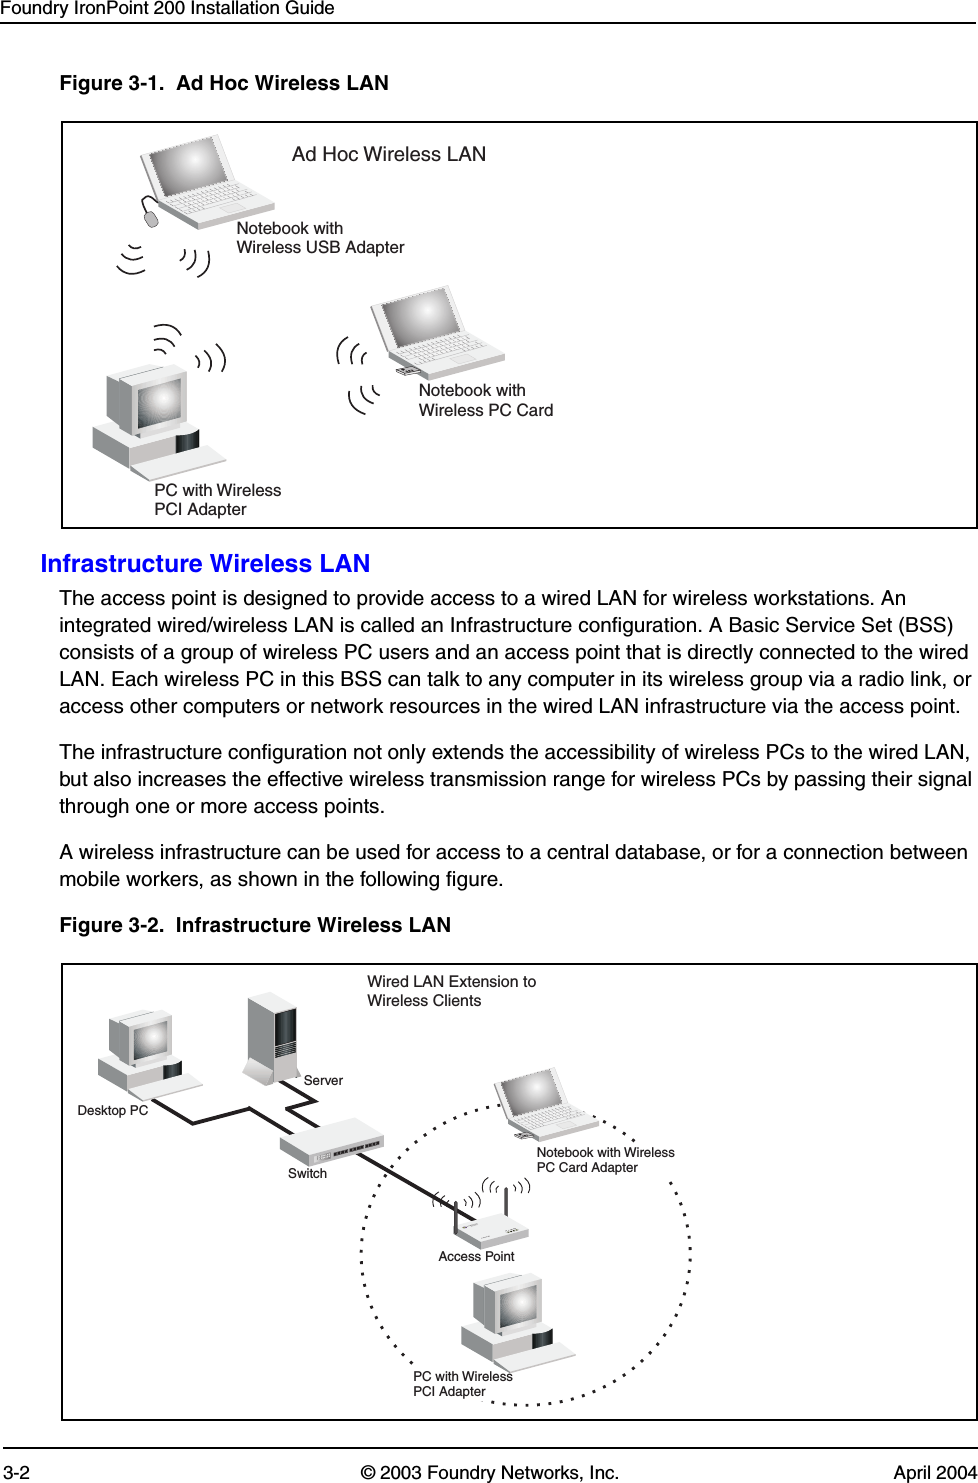 Foundry IronPoint 200 Installation Guide3-2 © 2003 Foundry Networks, Inc. April 2004Figure 3-1.  Ad Hoc Wireless LANInfrastructure Wireless LANThe access point is designed to provide access to a wired LAN for wireless workstations. An integrated wired/wireless LAN is called an Infrastructure configuration. A Basic Service Set (BSS) consists of a group of wireless PC users and an access point that is directly connected to the wired LAN. Each wireless PC in this BSS can talk to any computer in its wireless group via a radio link, or access other computers or network resources in the wired LAN infrastructure via the access point.The infrastructure configuration not only extends the accessibility of wireless PCs to the wired LAN, but also increases the effective wireless transmission range for wireless PCs by passing their signal through one or more access points.A wireless infrastructure can be used for access to a central database, or for a connection between mobile workers, as shown in the following figure.Figure 3-2.  Infrastructure Wireless LANAd Hoc Wireless LANNotebook withWireless USB AdapterNotebook withWireless PC CardPC with WirelessPCI AdapterServerSwitchDesktop PCAccess PointPC with WirelessPCI AdapterNotebook with WirelessPC Card AdapterWired LAN Extension toWireless Clients